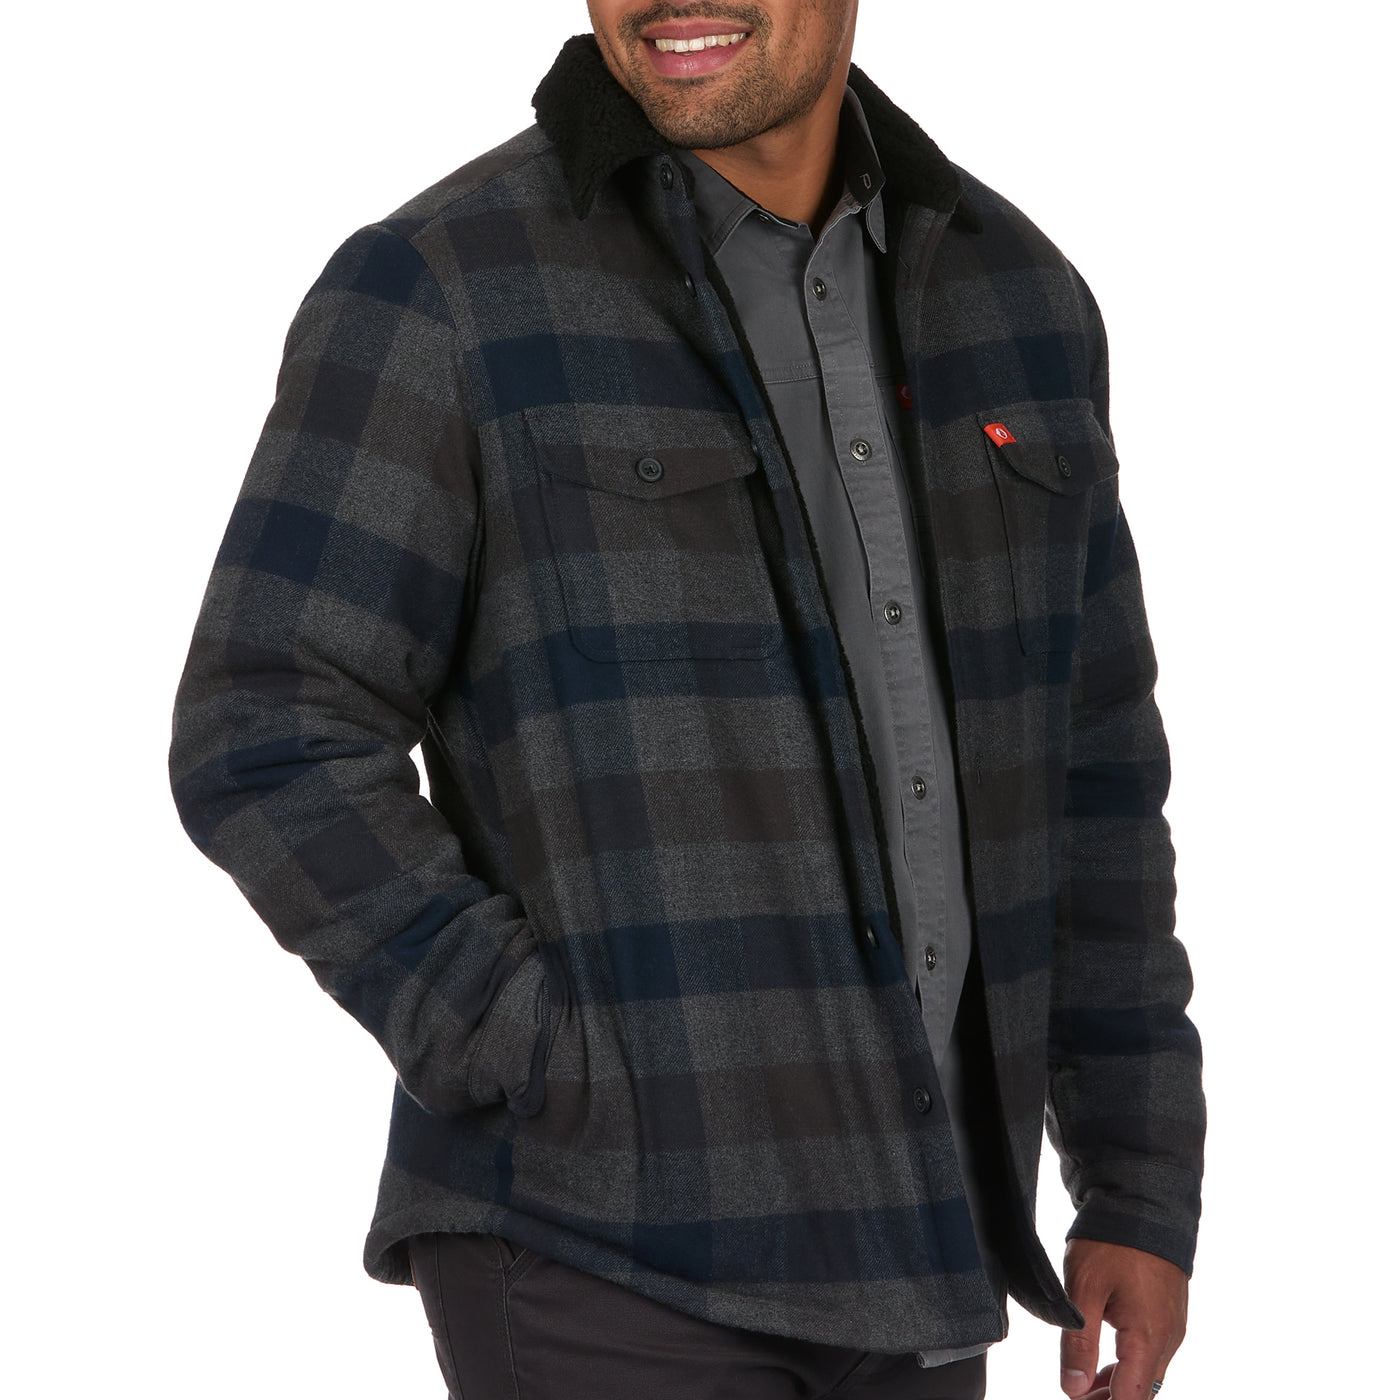 Bonded Flannel Shirt Jacket with Sherpa Fleece Lining - The American Outdoorsman